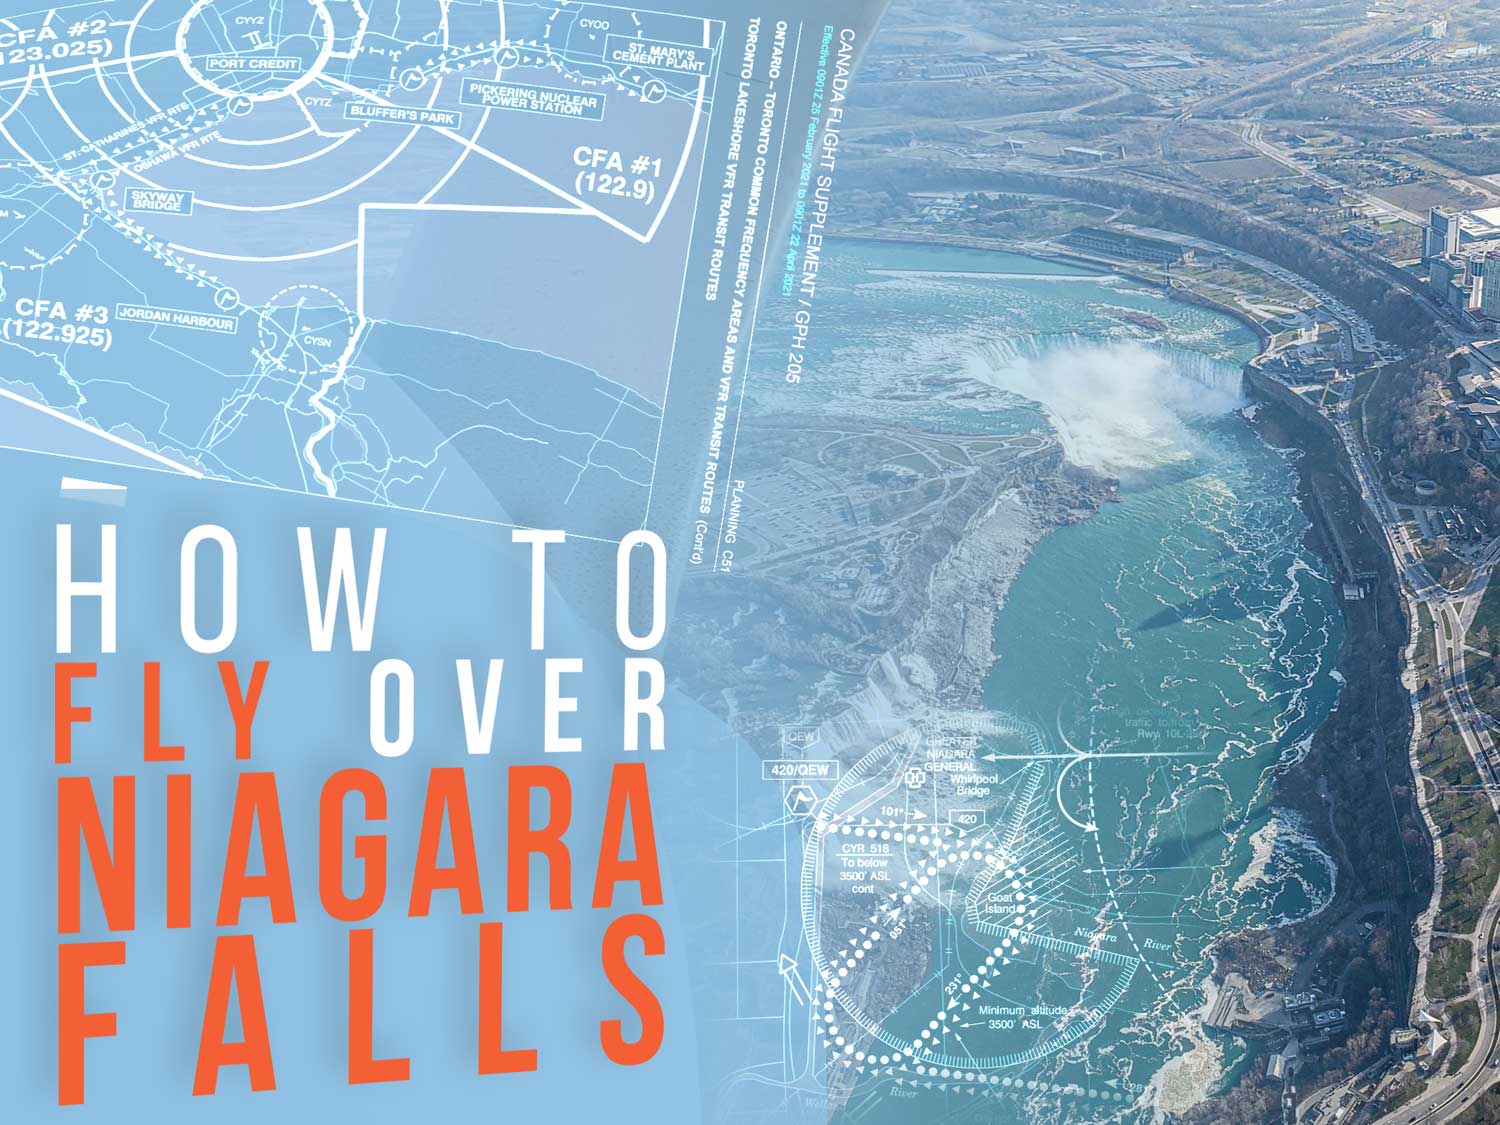 How To Fly Over Niagara Falls Course Thumb